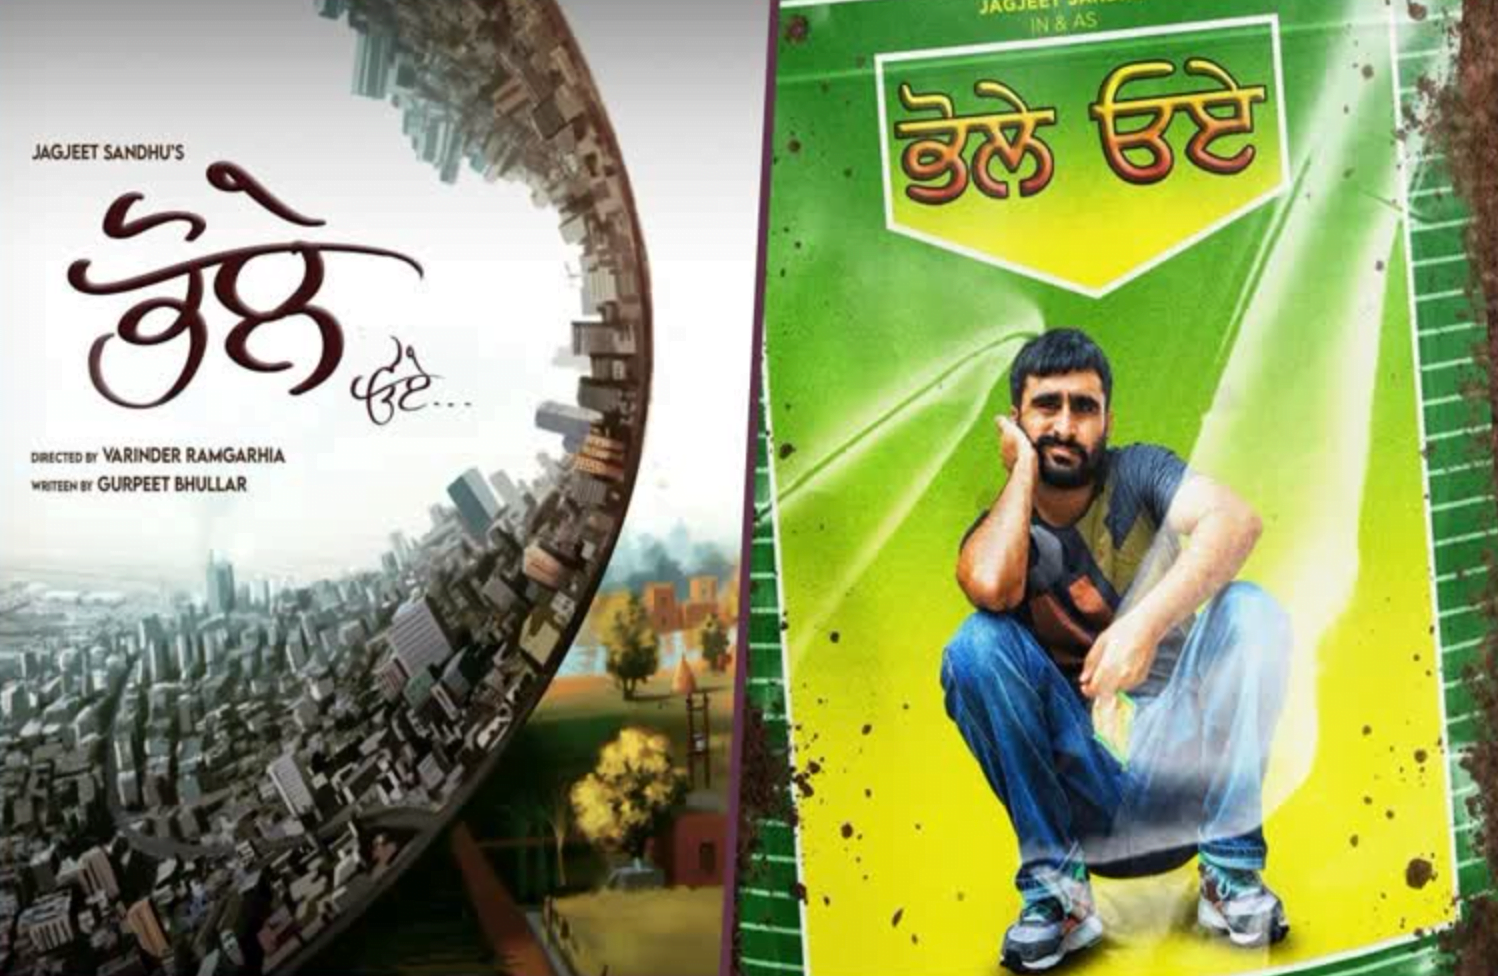 Bhole Oye Budget and Collection, Hit Or Flop, OTT Release, Rating, And Star Cast